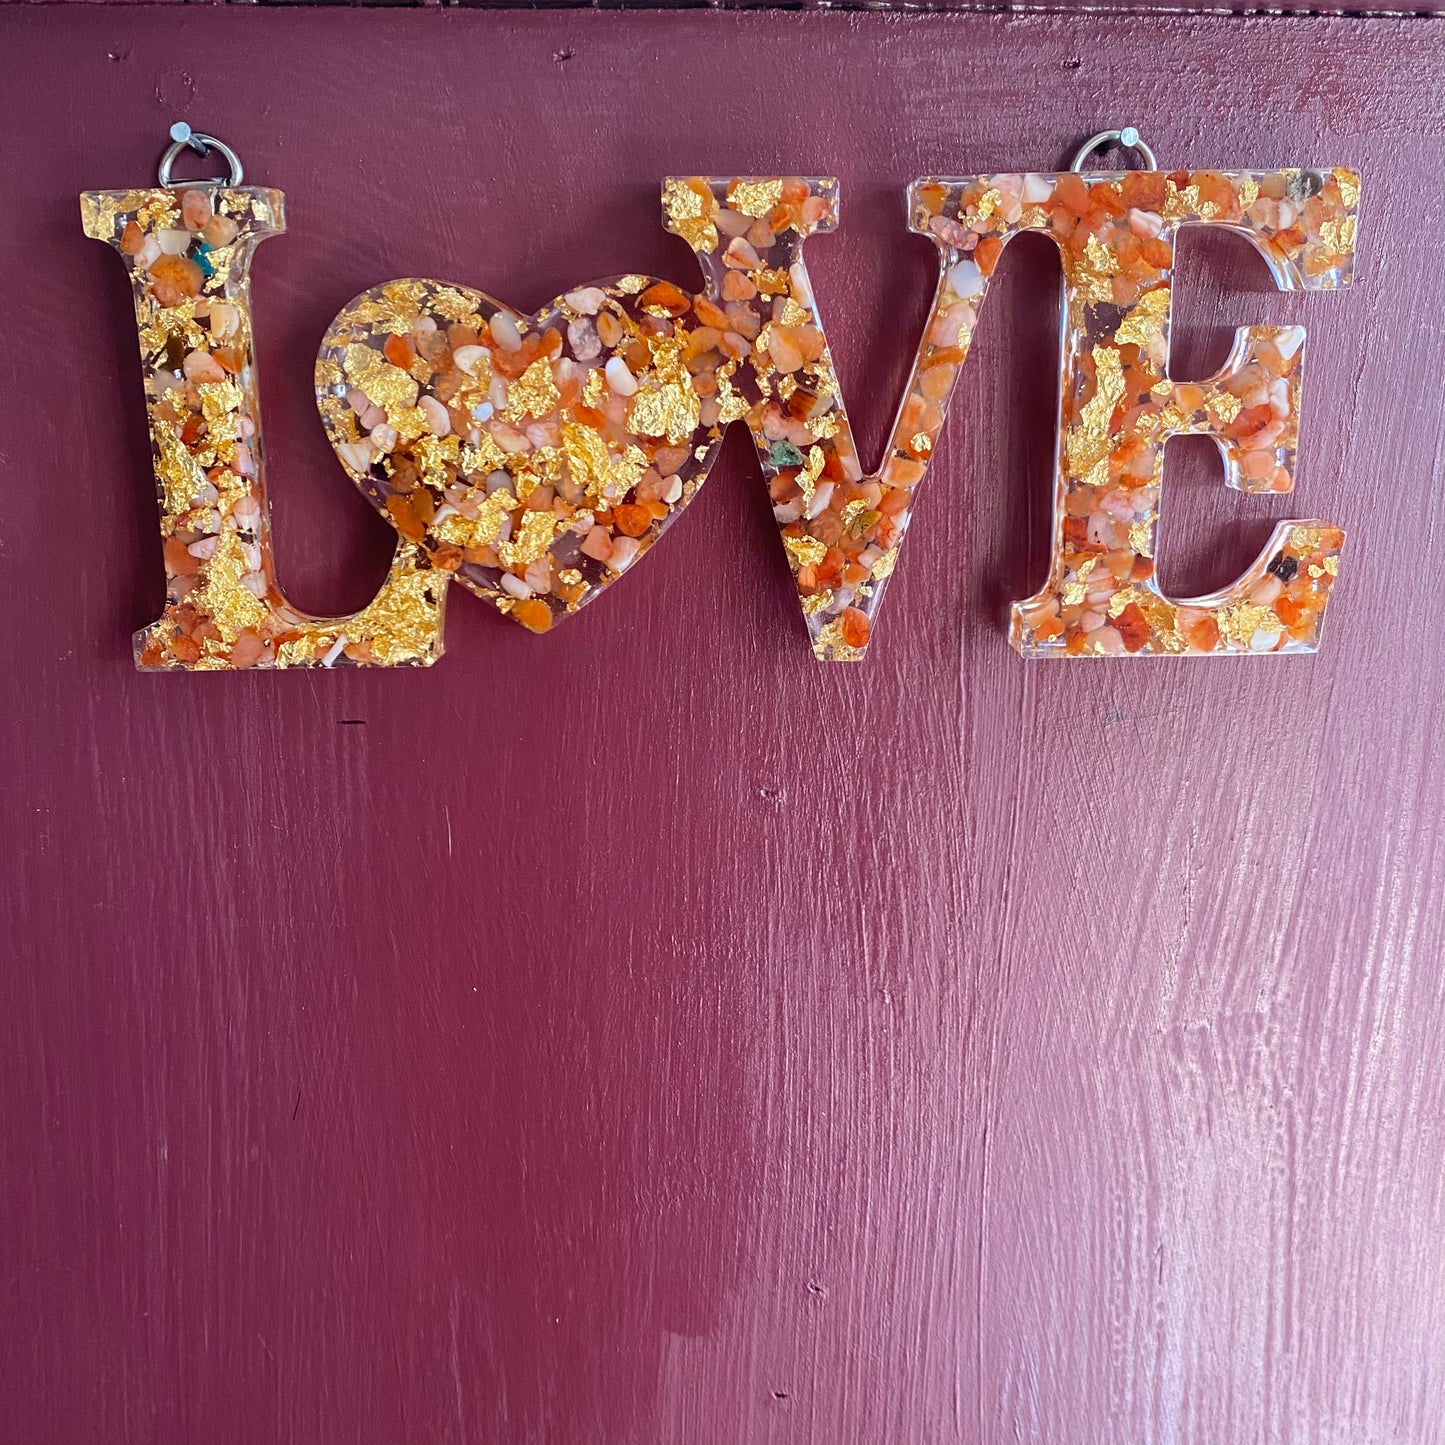 Carnelian & Gold Leaf Love Sign - Hanging or Self Stand